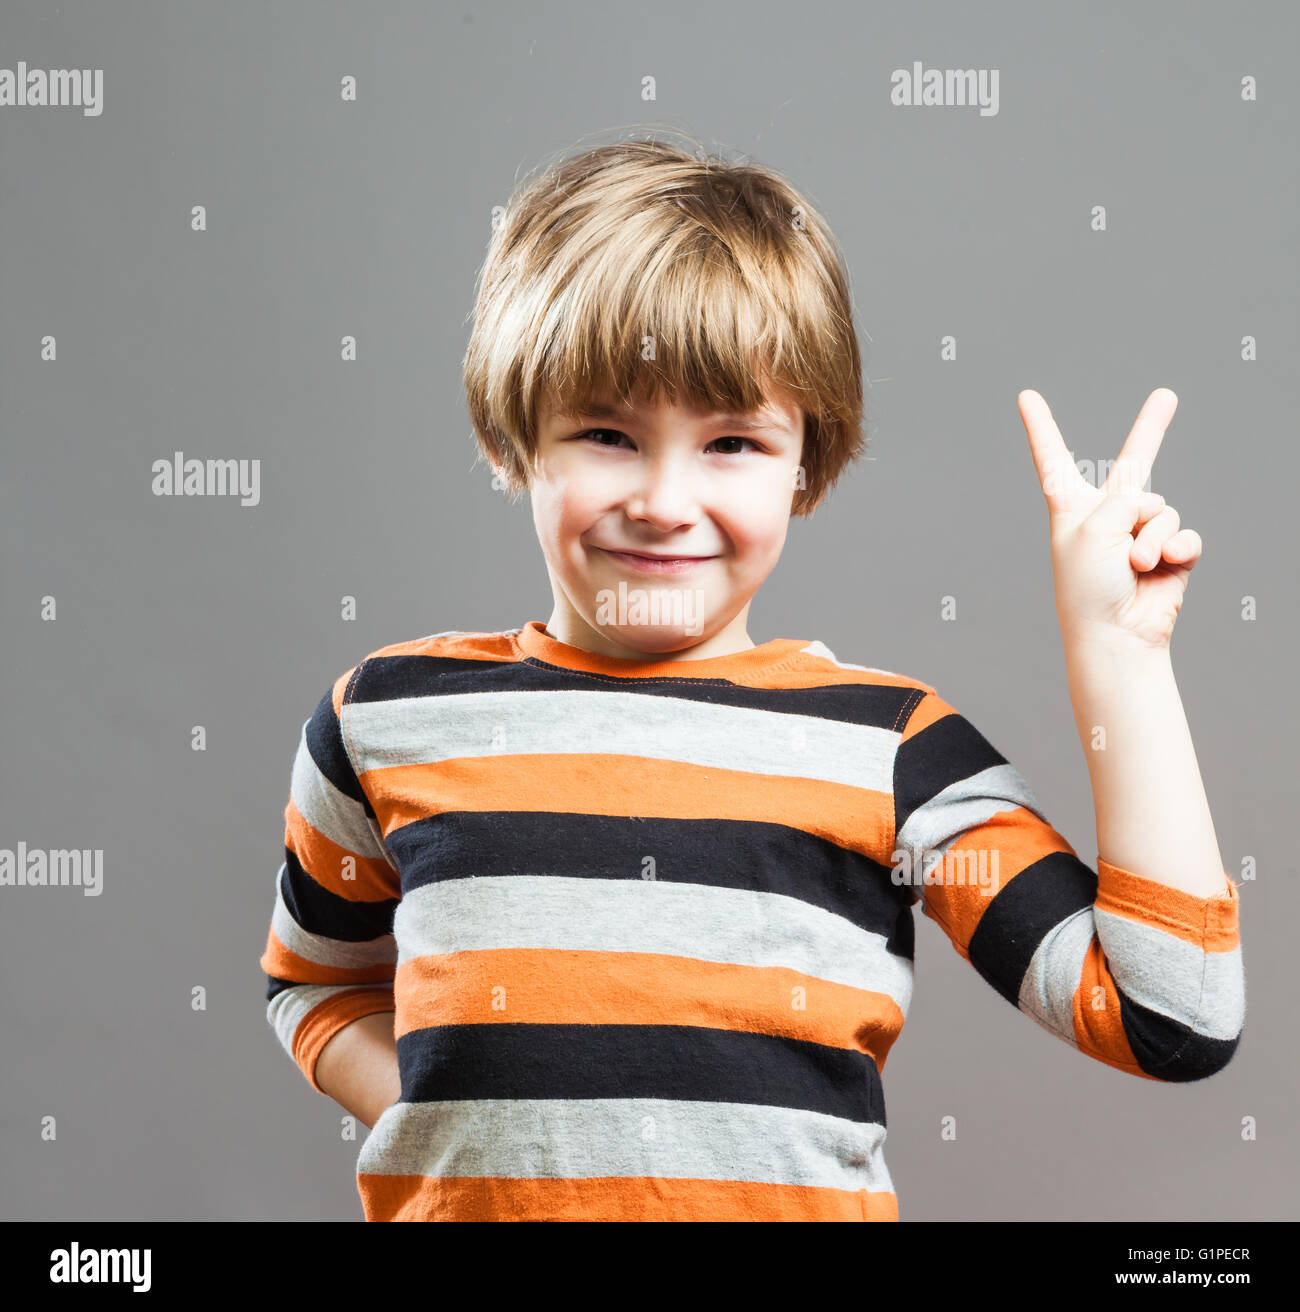 Cute Preschooler having fun in orange black striped shirt, making a Peace Sign with his Fingers Stock Photo